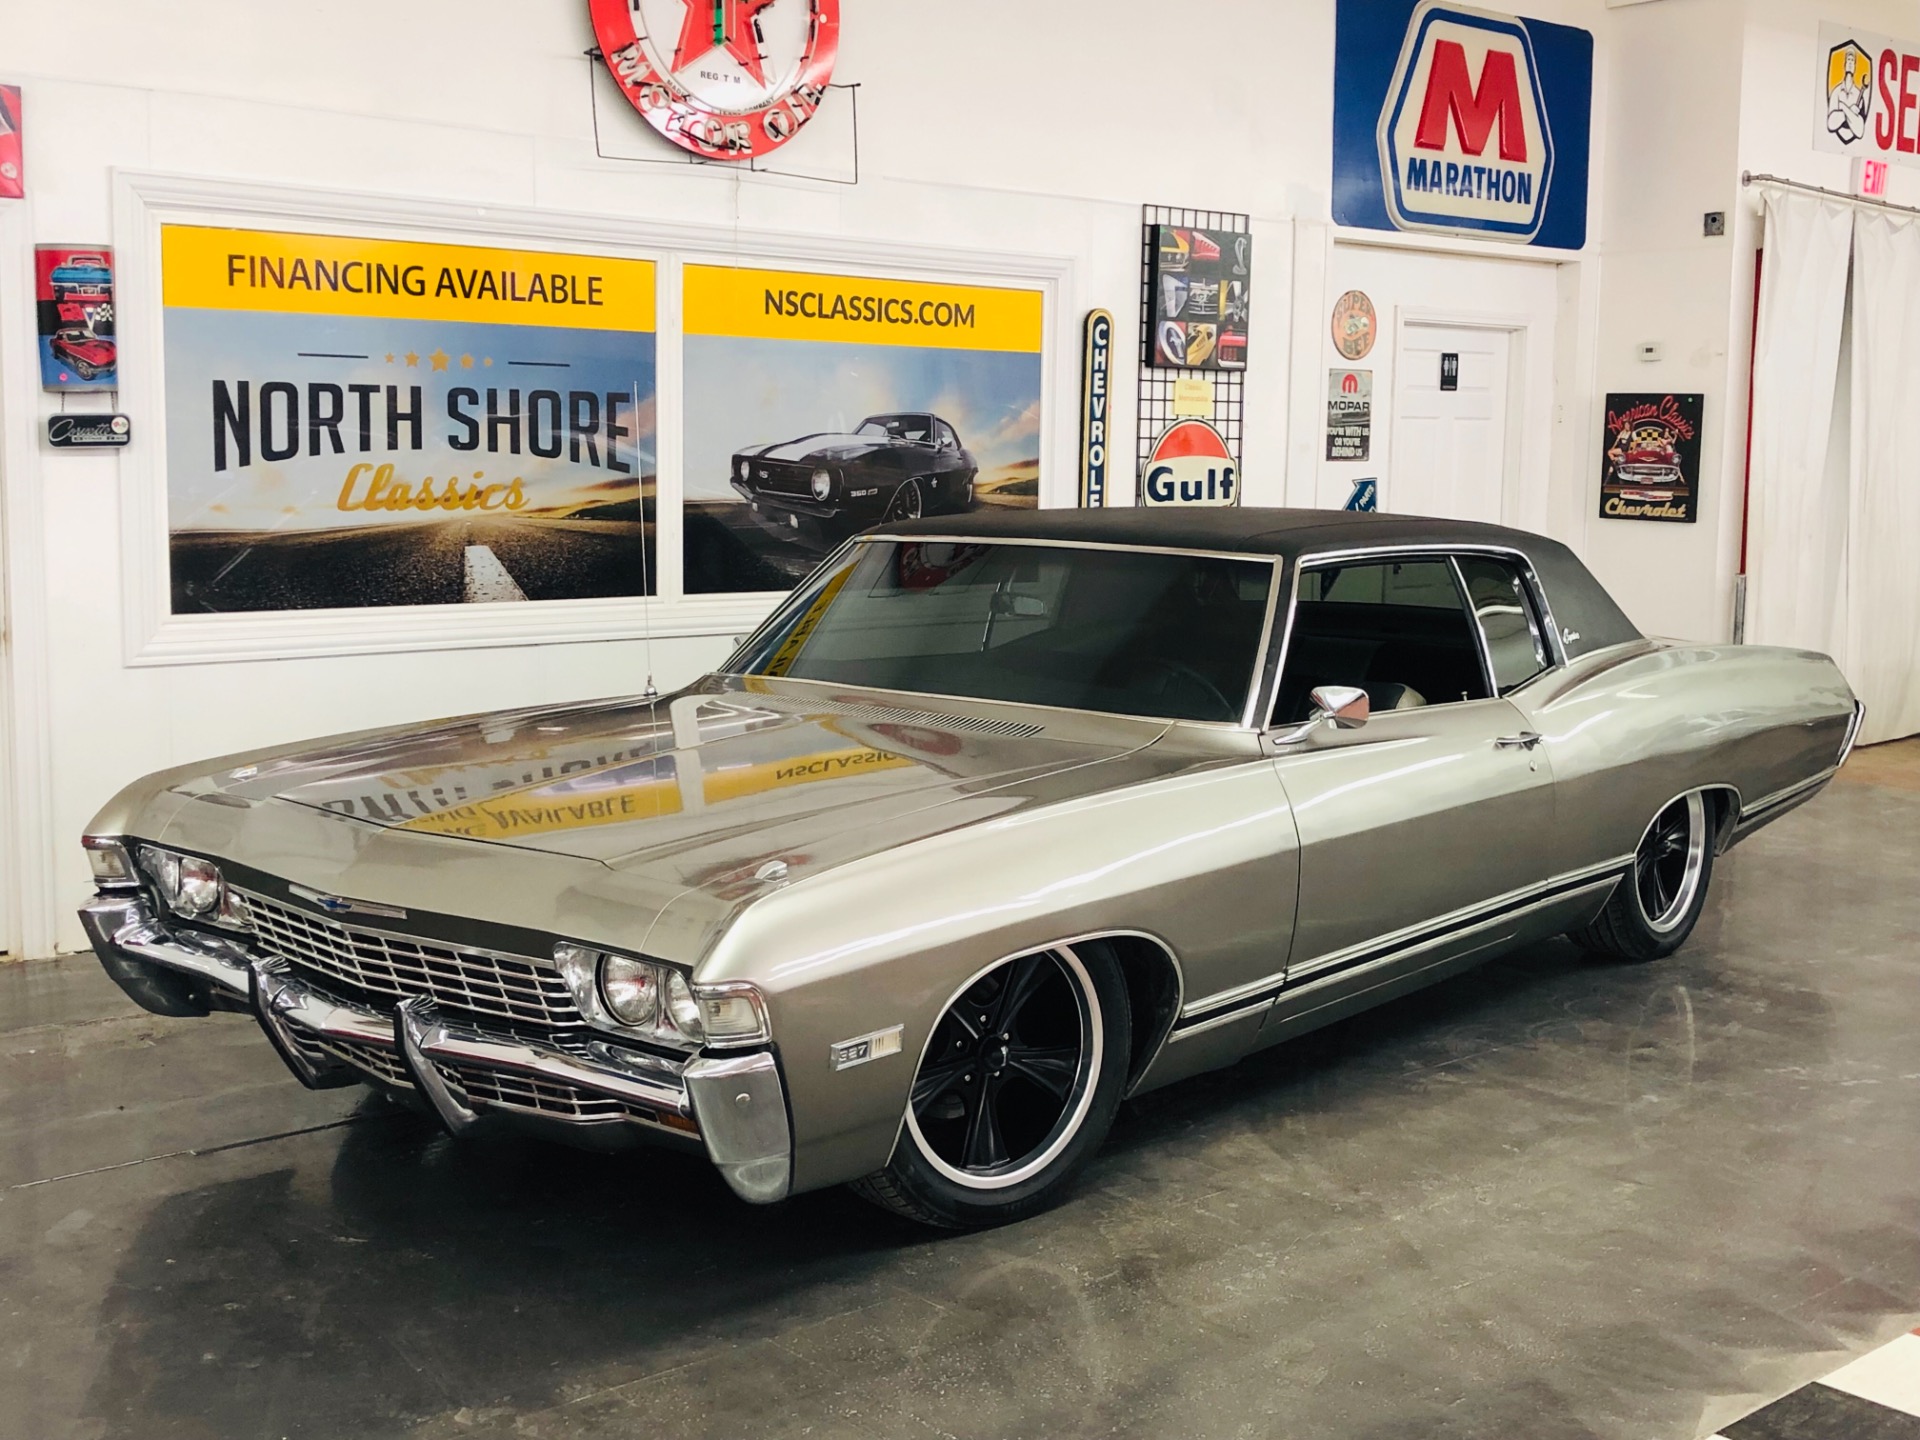 Corporation Plantage Scherm Used 1968 Chevrolet Caprice -NEW LOW PRICE -COOL CUSTOM CAPRICE- AIR RIDE-  NEW PAINT- SEE VIDEO For Sale (Sold) | North Shore Classics Stock #68327KFCV